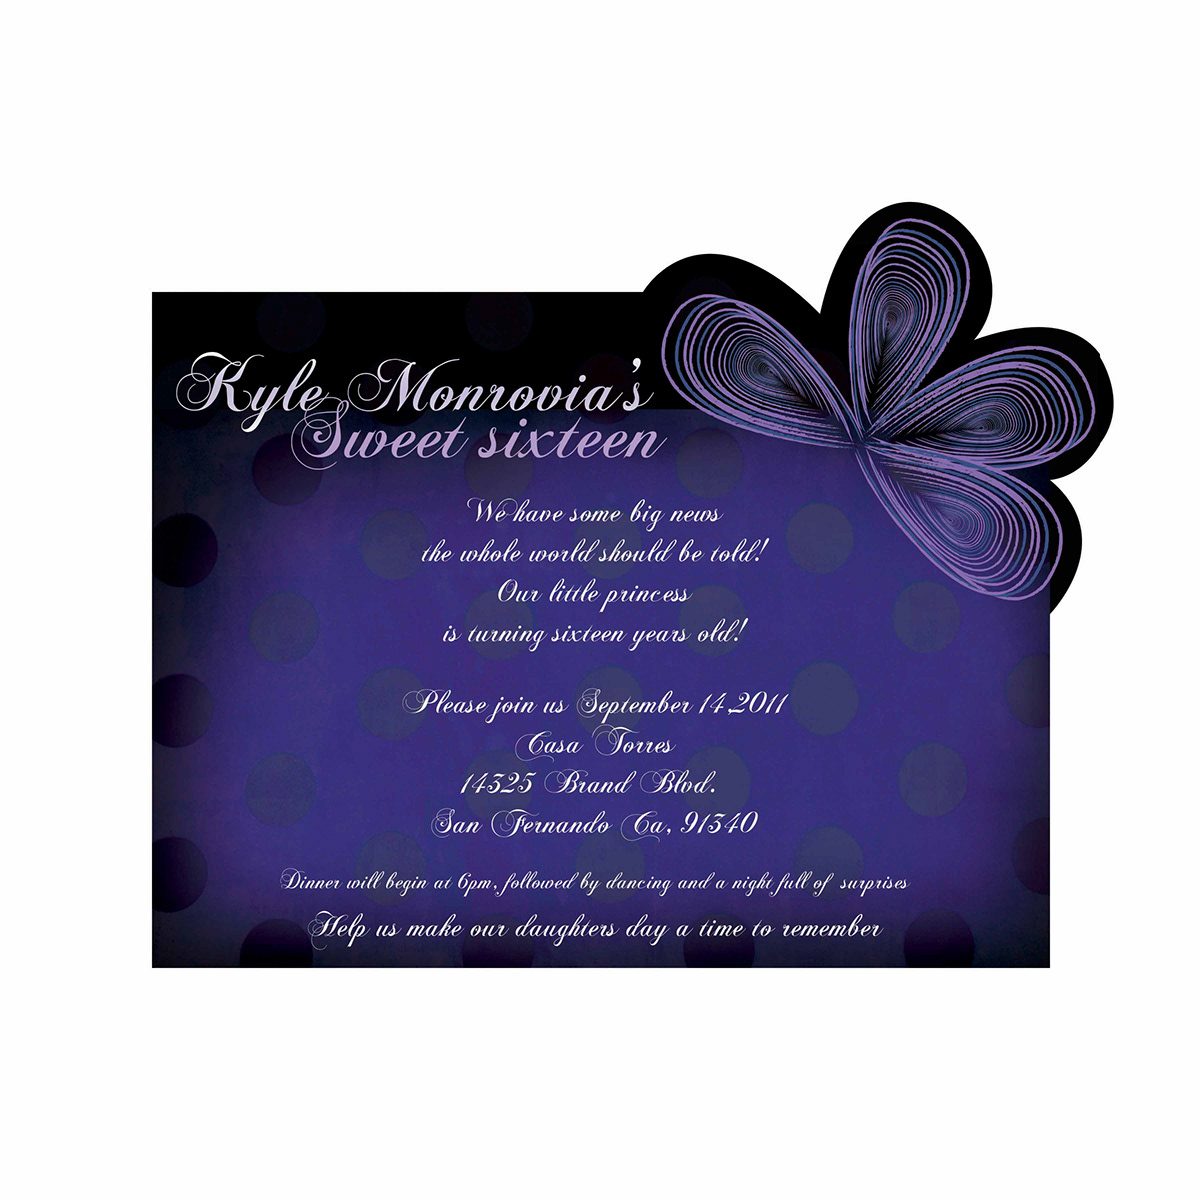 invitations Events party Layout color shapes